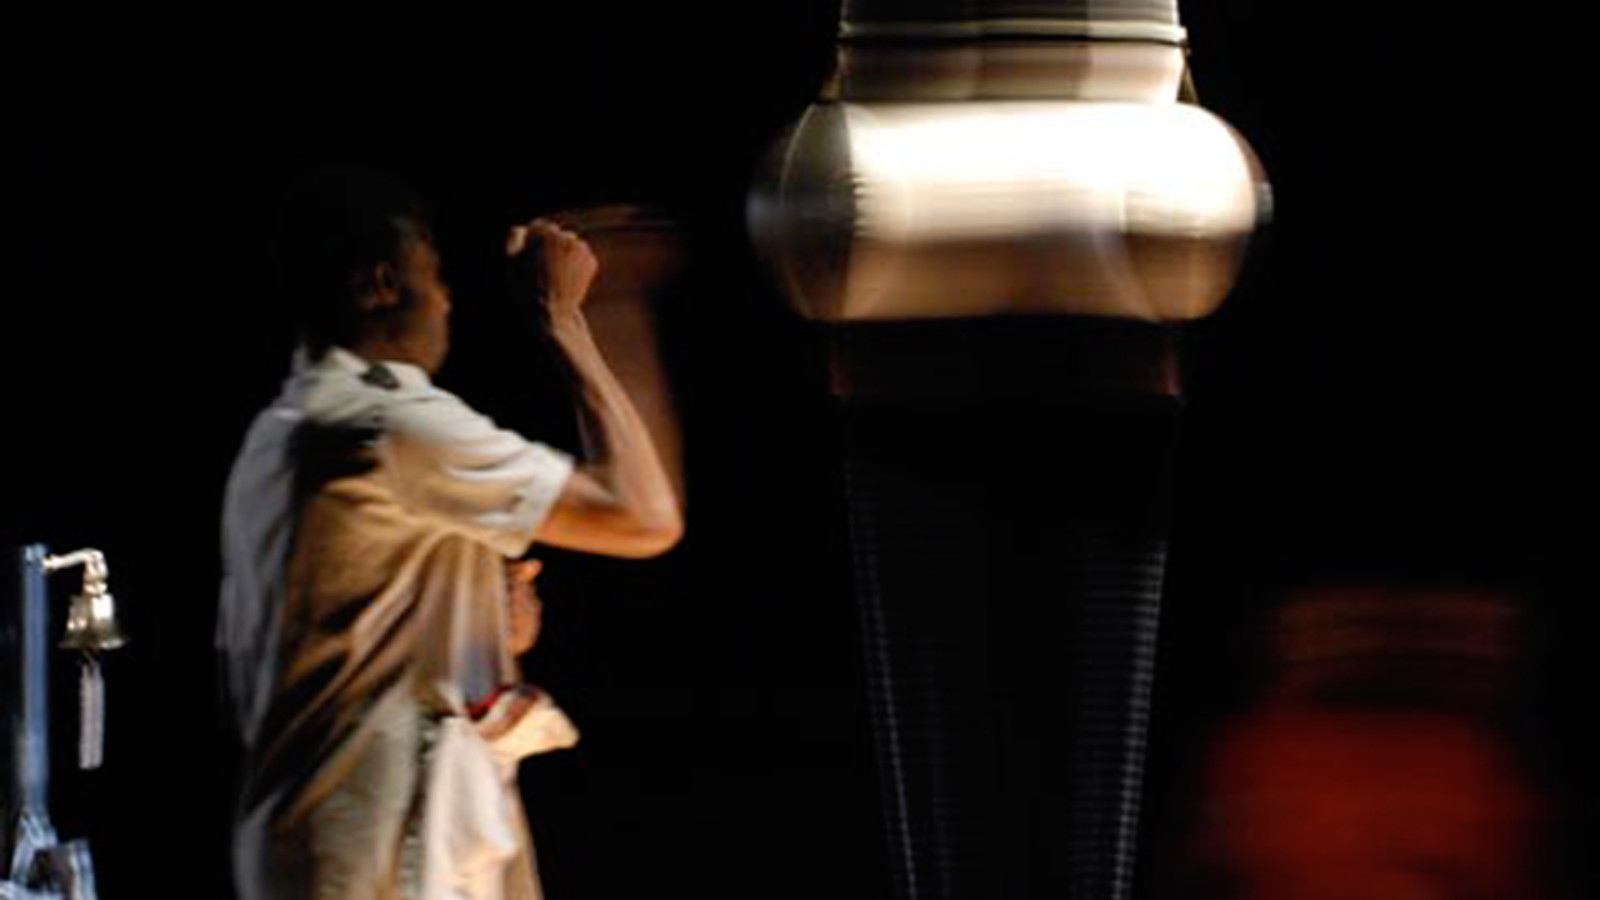 A person wearing a light coloured shirt stands in a dark room punching a punching bag.